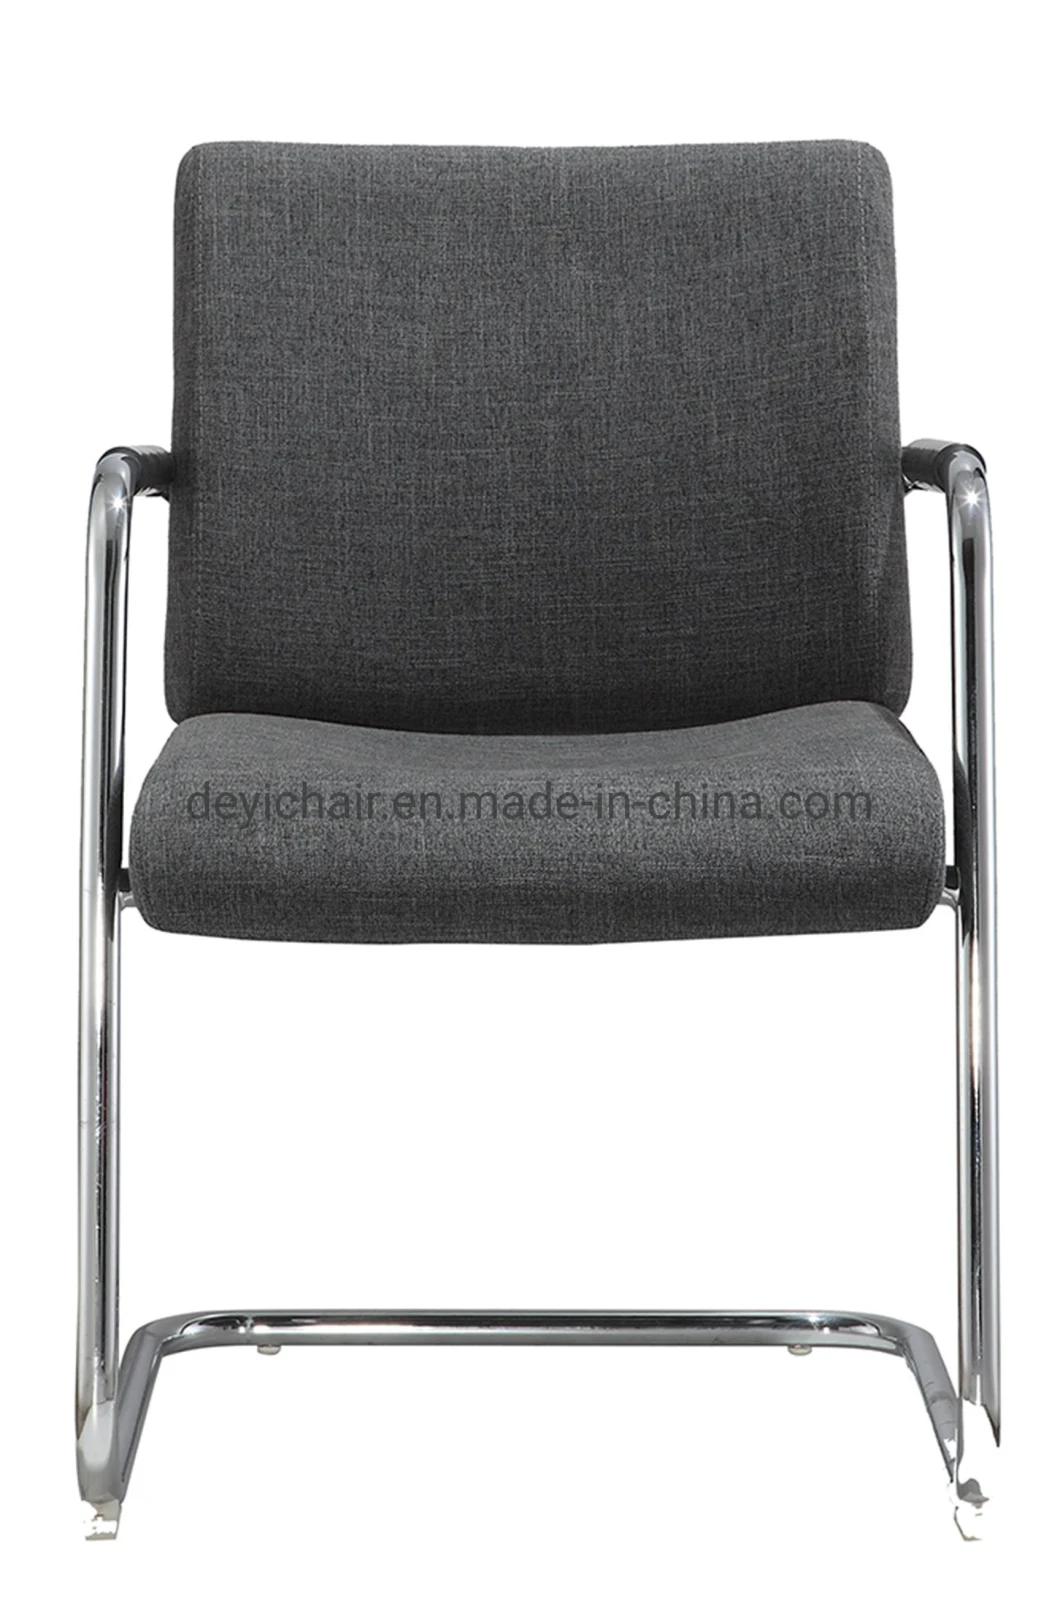 25 Tube 2.0mm Thickness Bow Frame with Armrest Medium Fabric Back and Seat Conference Chair